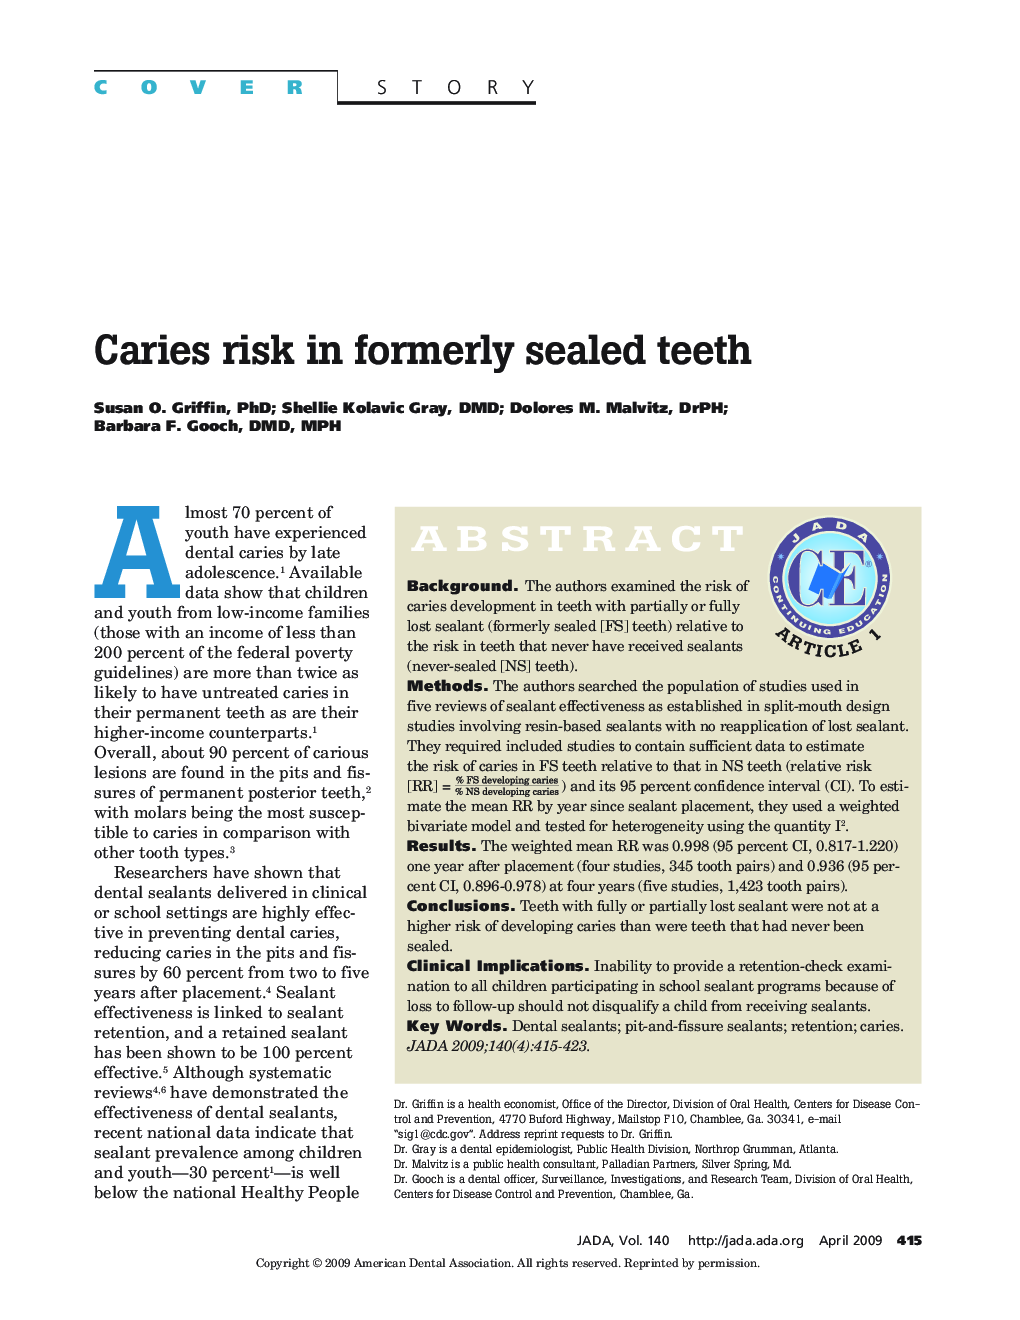 Caries Risk in Formerly Sealed Teeth 